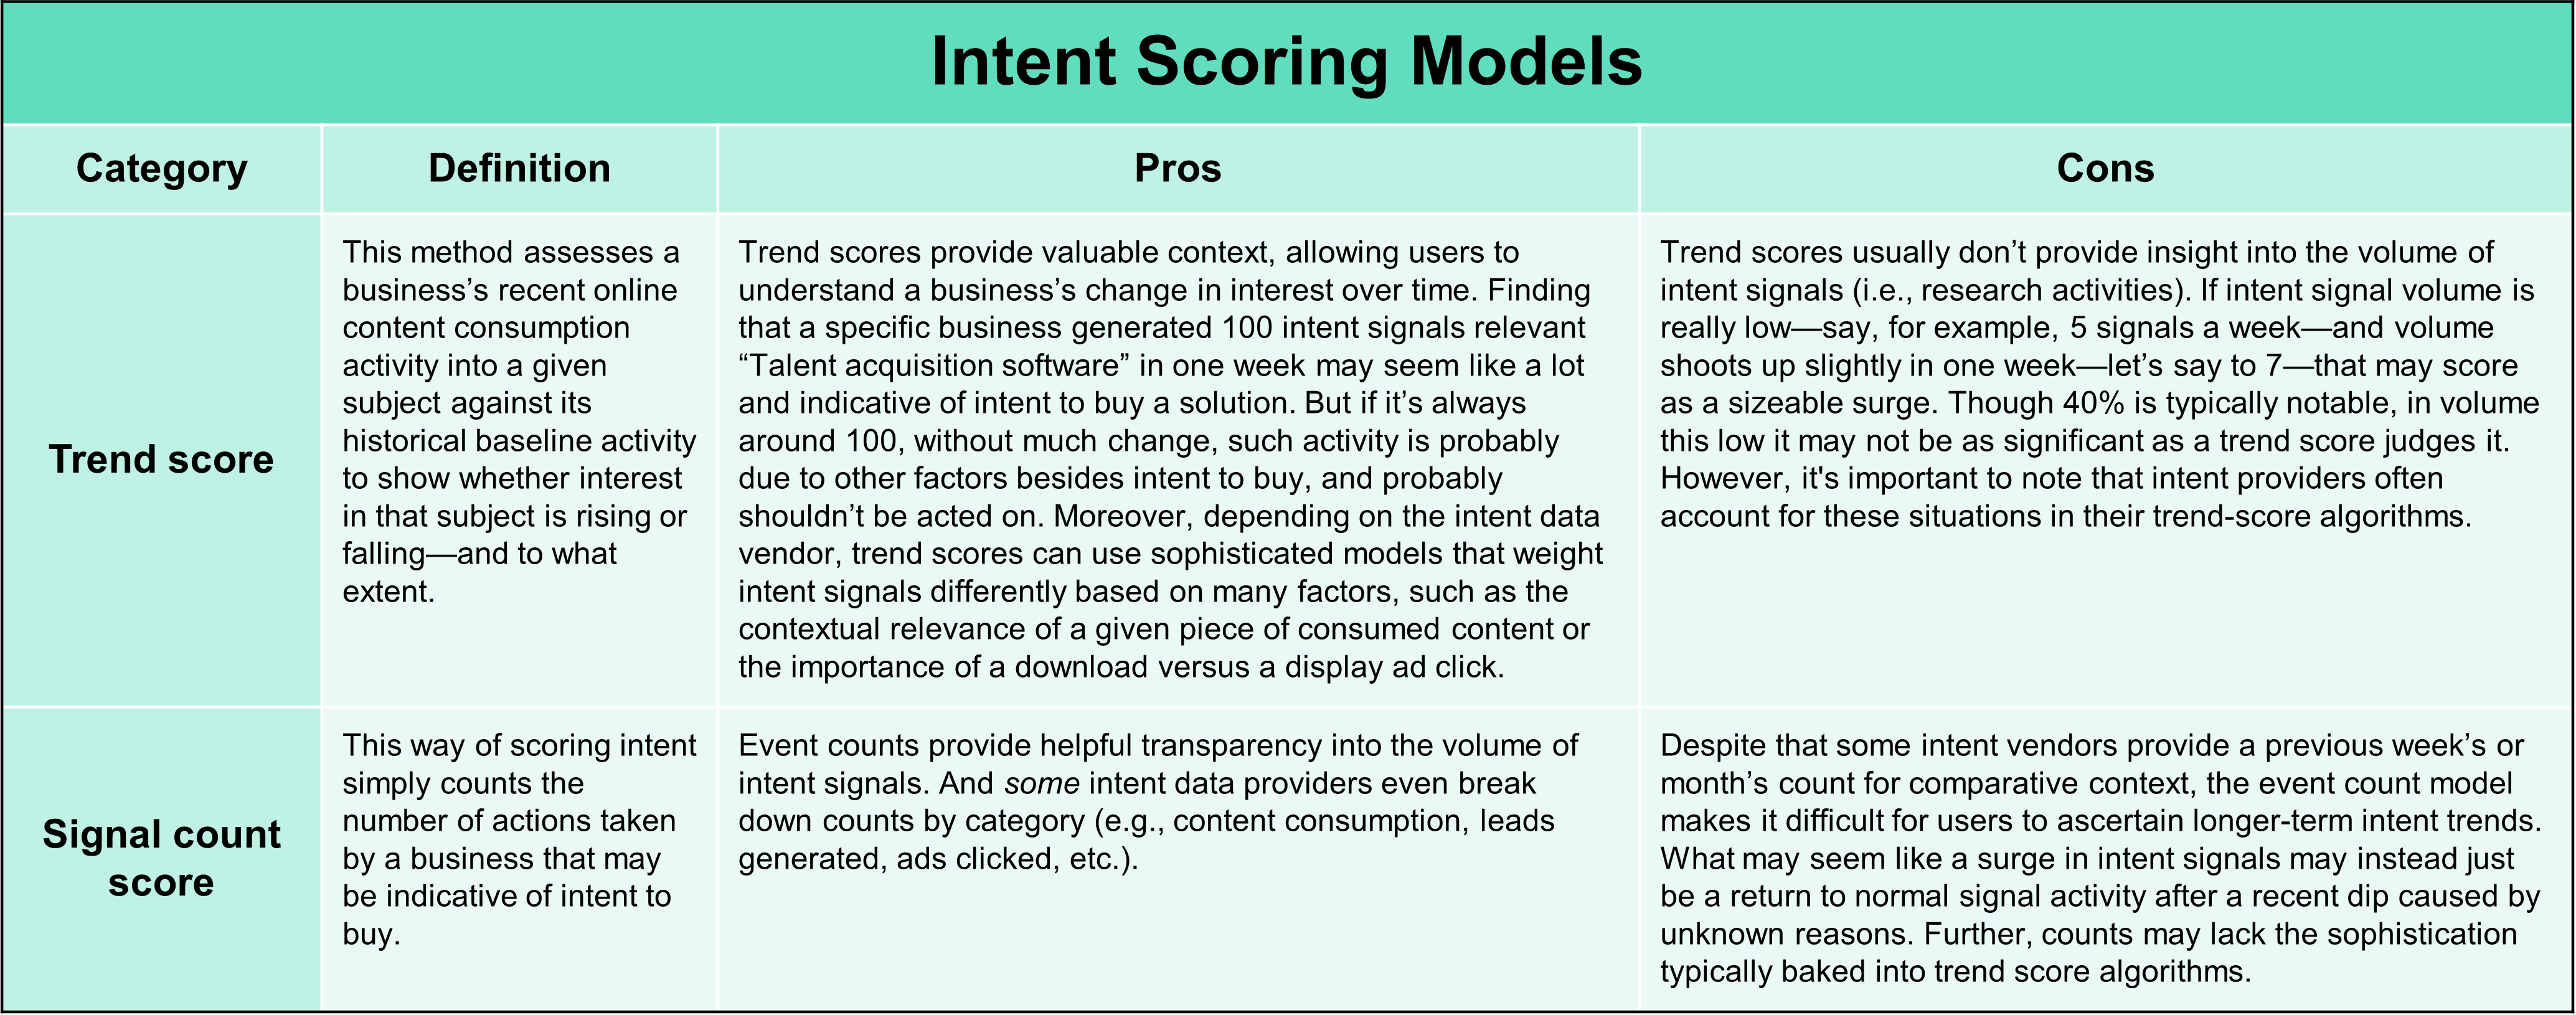 Table showing intent scoring models.